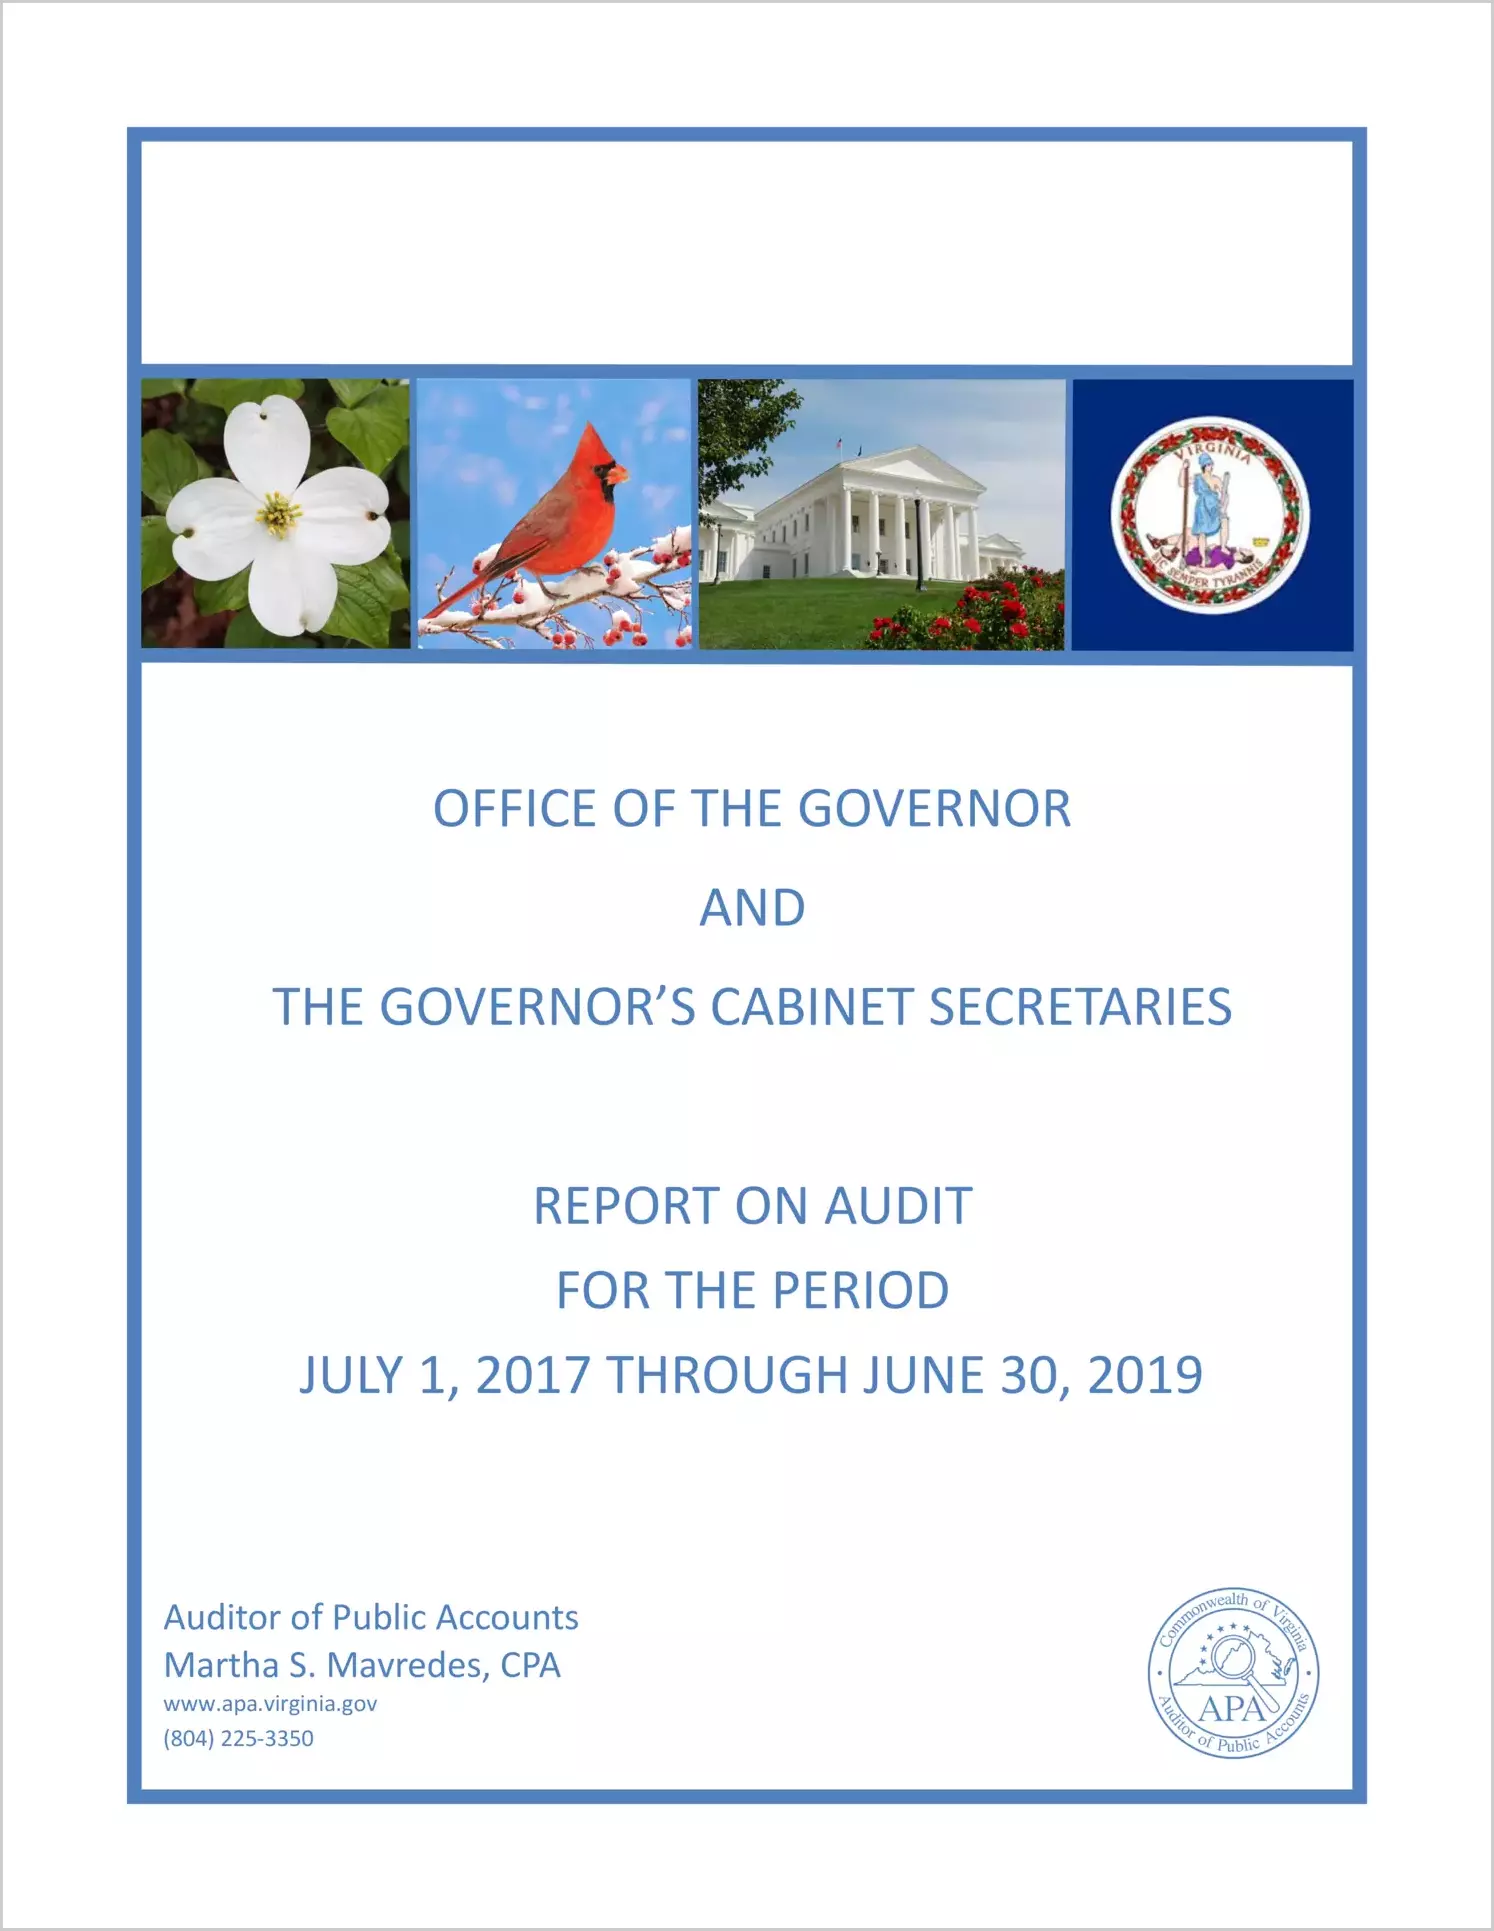 Office of the Governor and The Governor's Cabinet Secretaries for the period July 1, 2017 through June 30, 2019